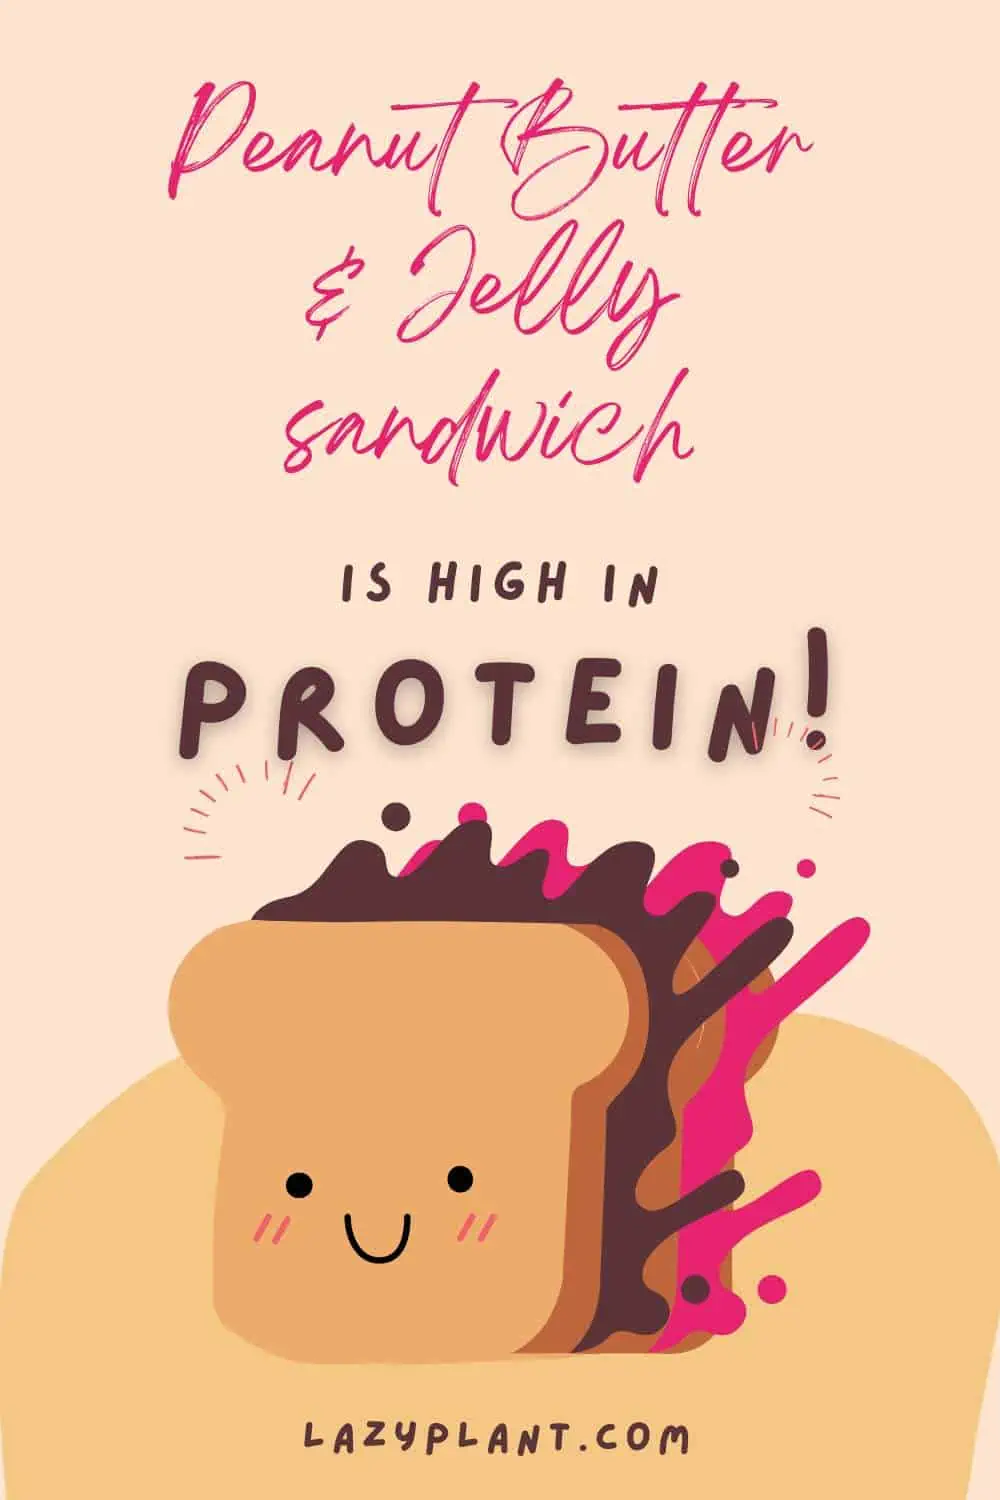 A peanut butter and jelly sandwich is high in protein. It has about 9 grams of protein!